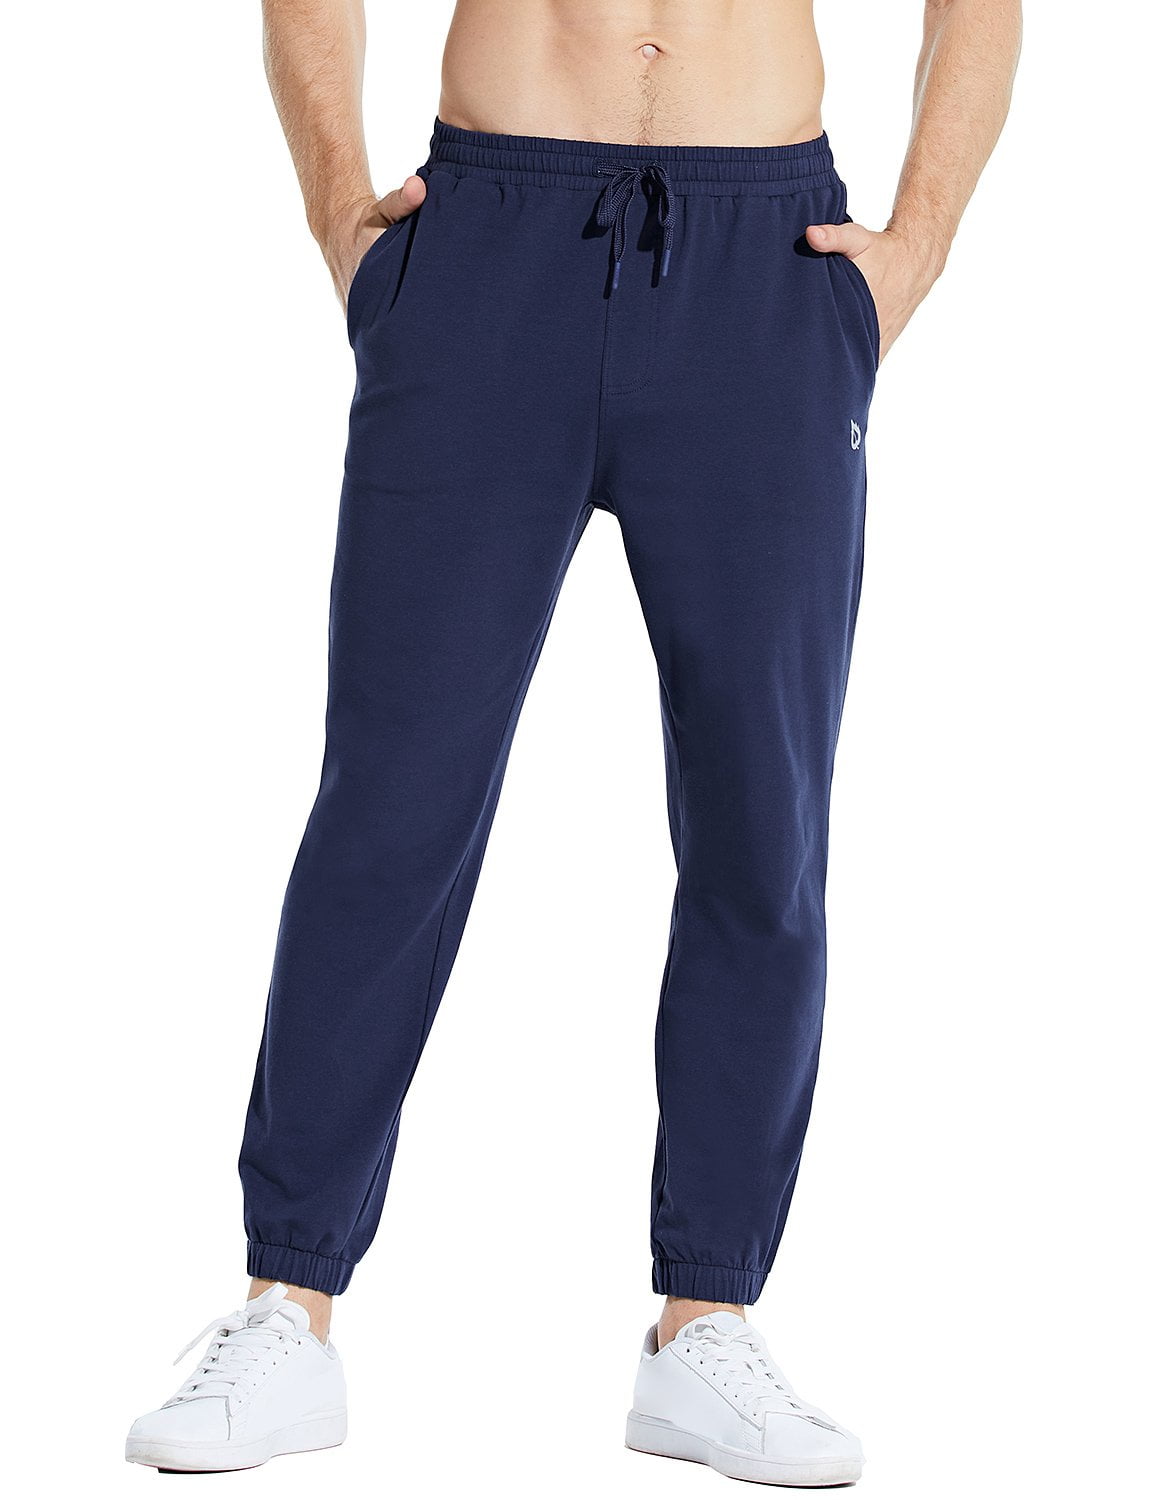 $7/mo - Finance BALEAF Women's Sweatpants Joggers Cotton Yoga Lounge Sweat  Pants Casual Running Tapered Pants with Pockets